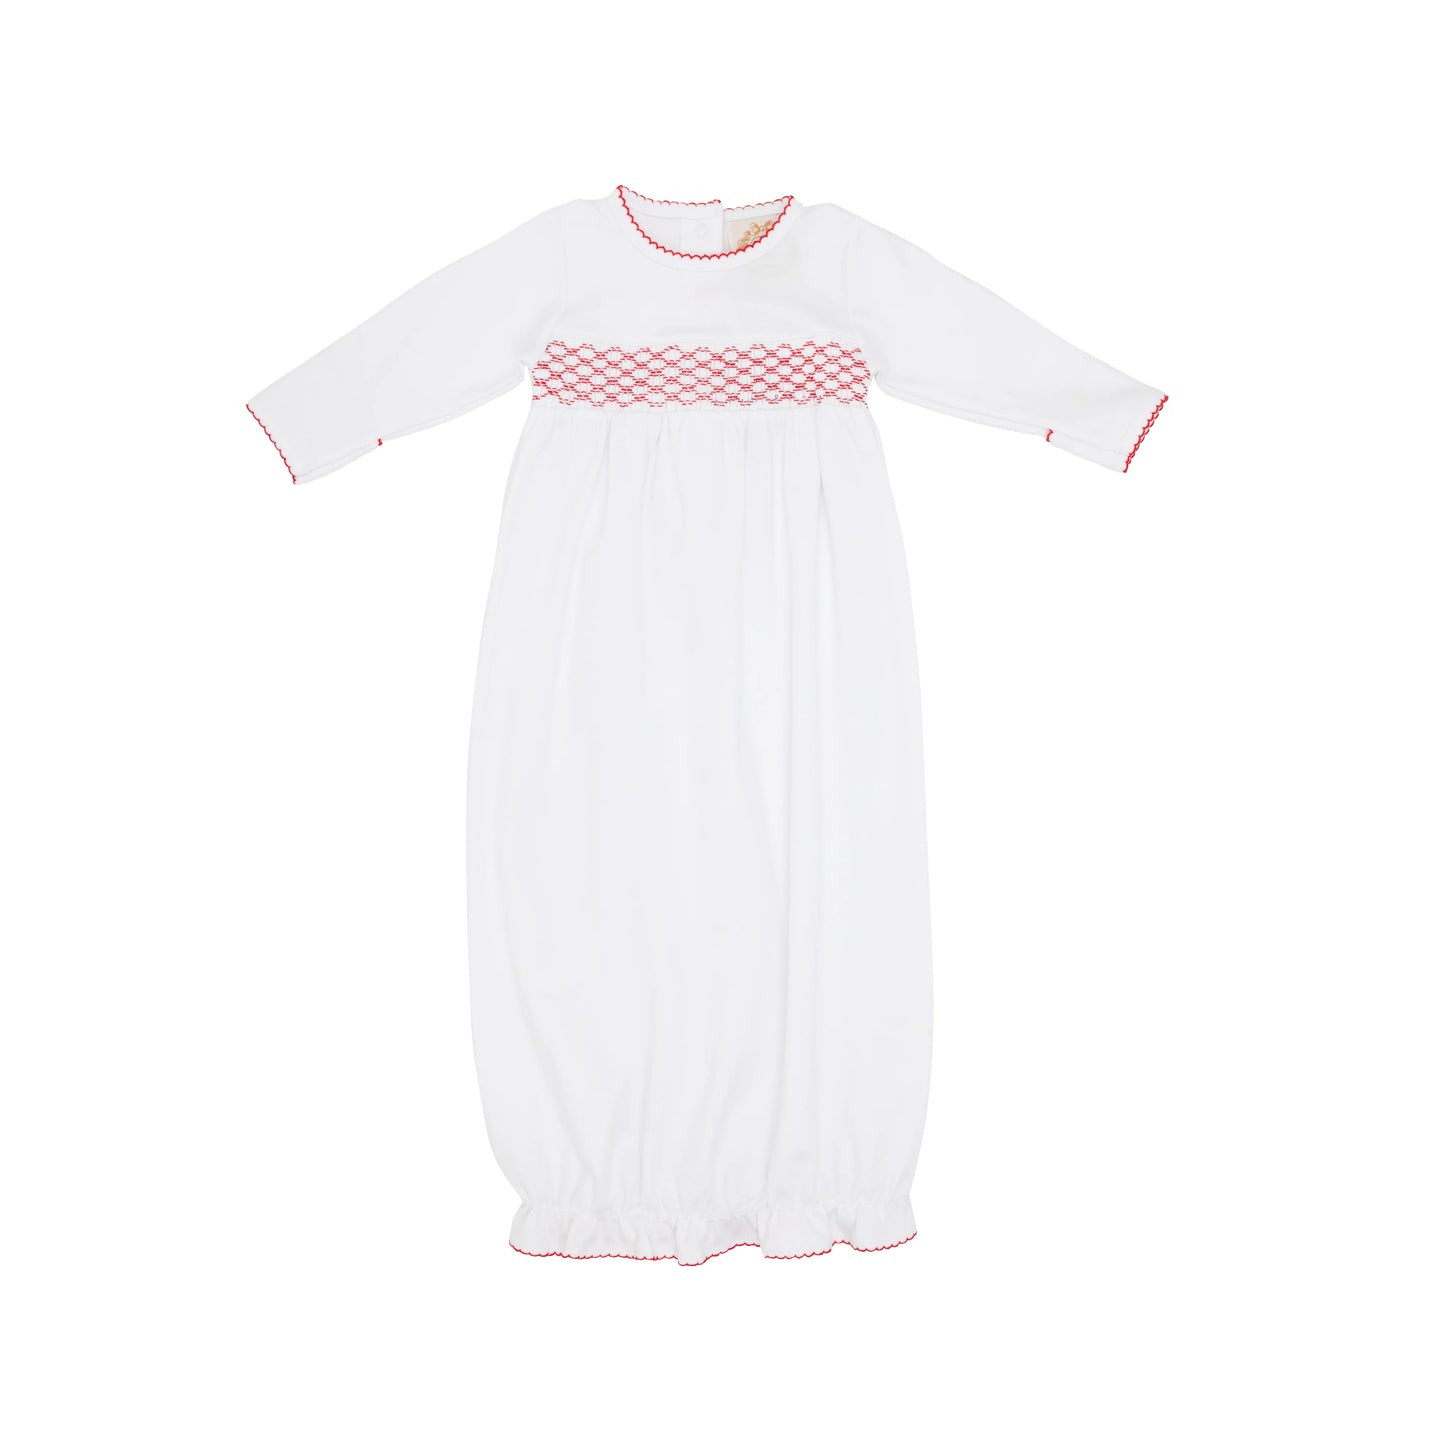 SWEETLY SMOCKED GOWN BOY RED